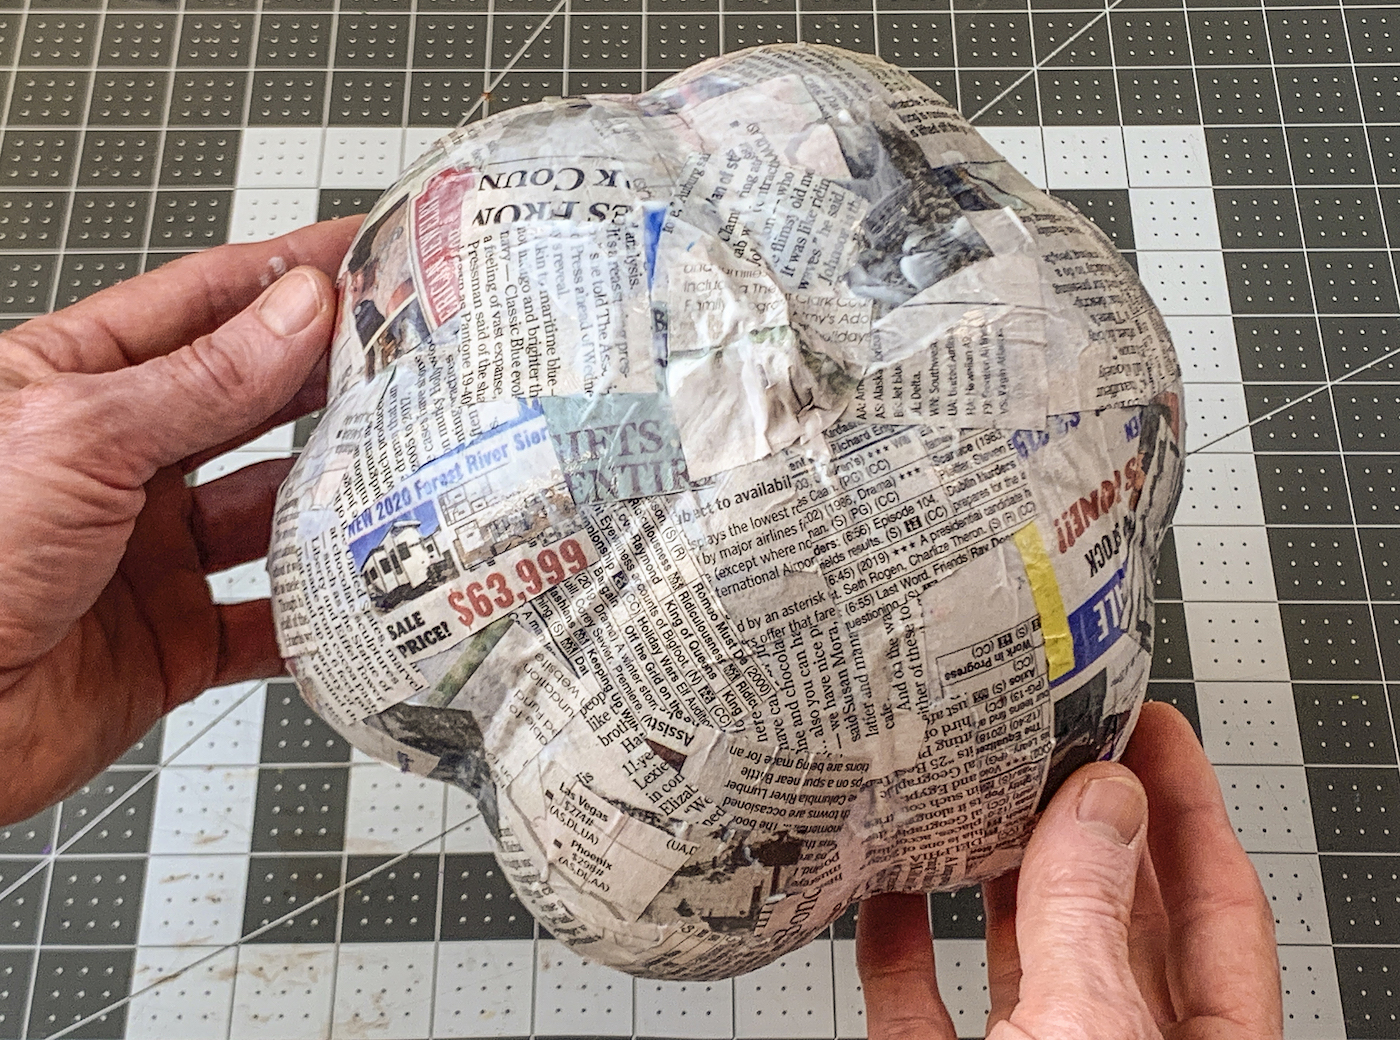 Two additional layers of newspaper added to the baloon